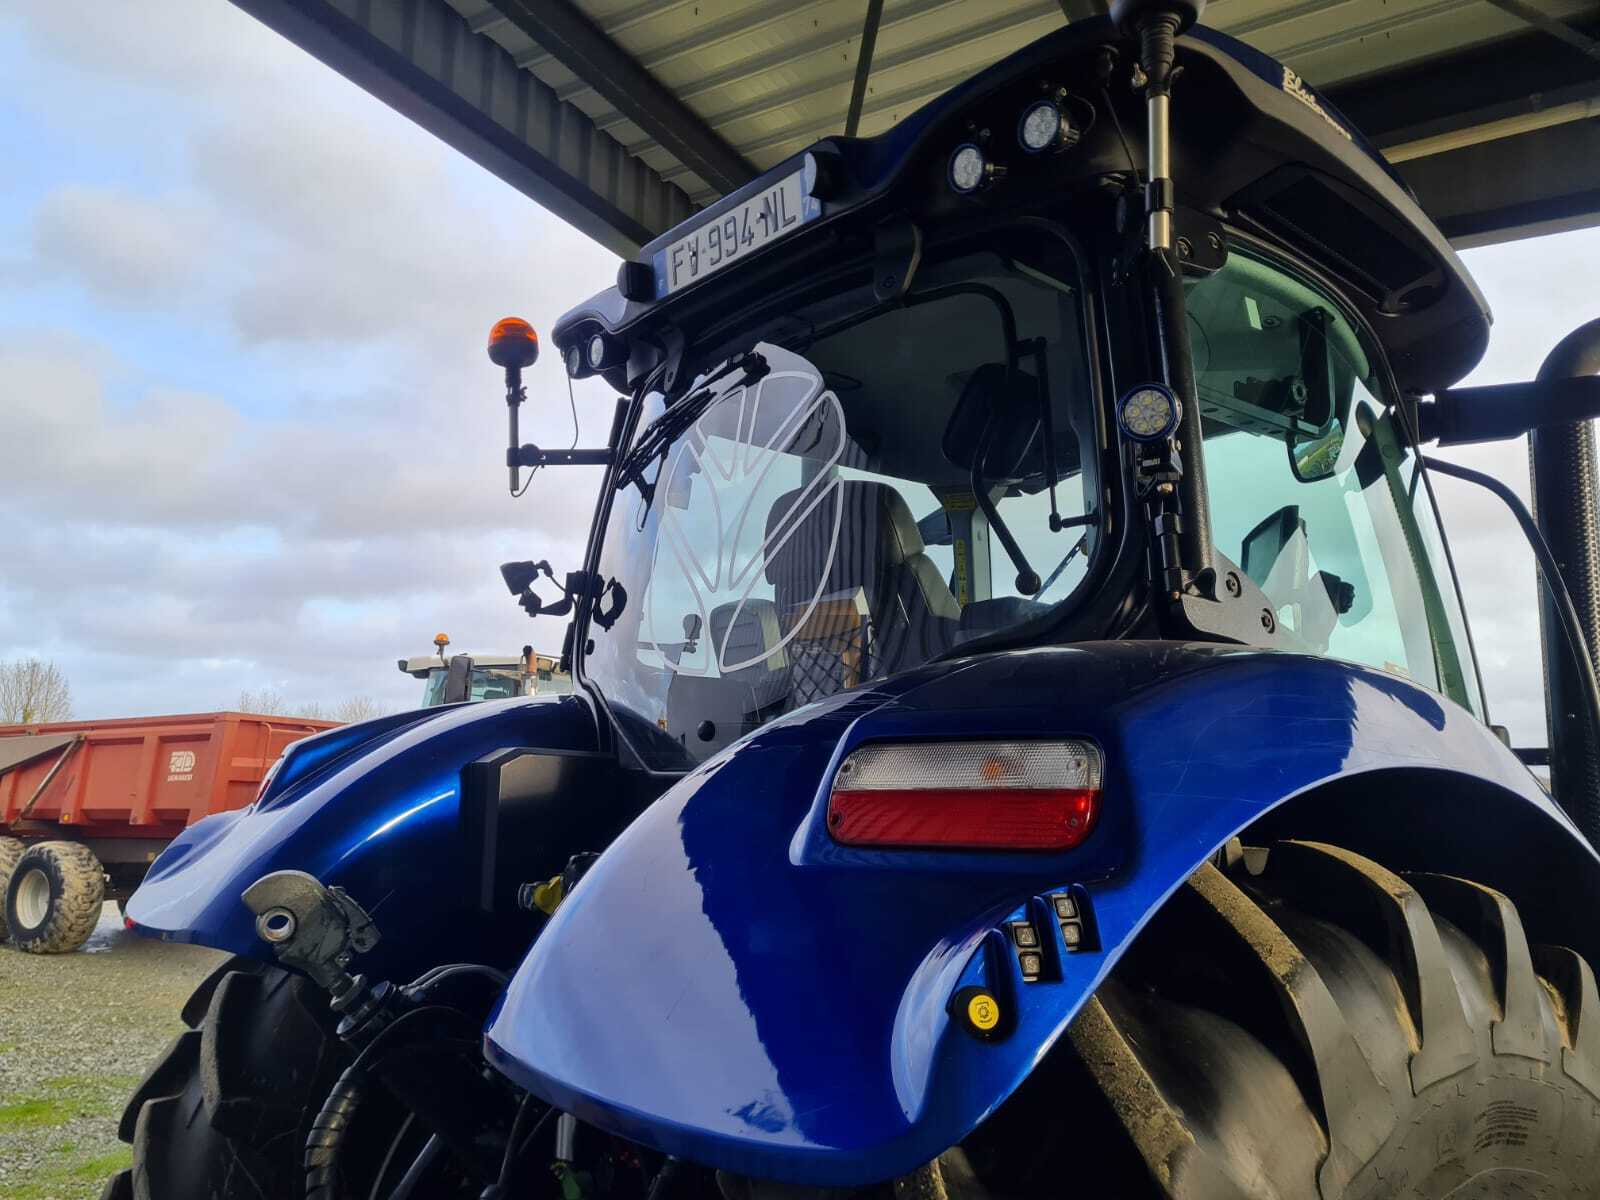 NEW HOLLAND T6.180 DC